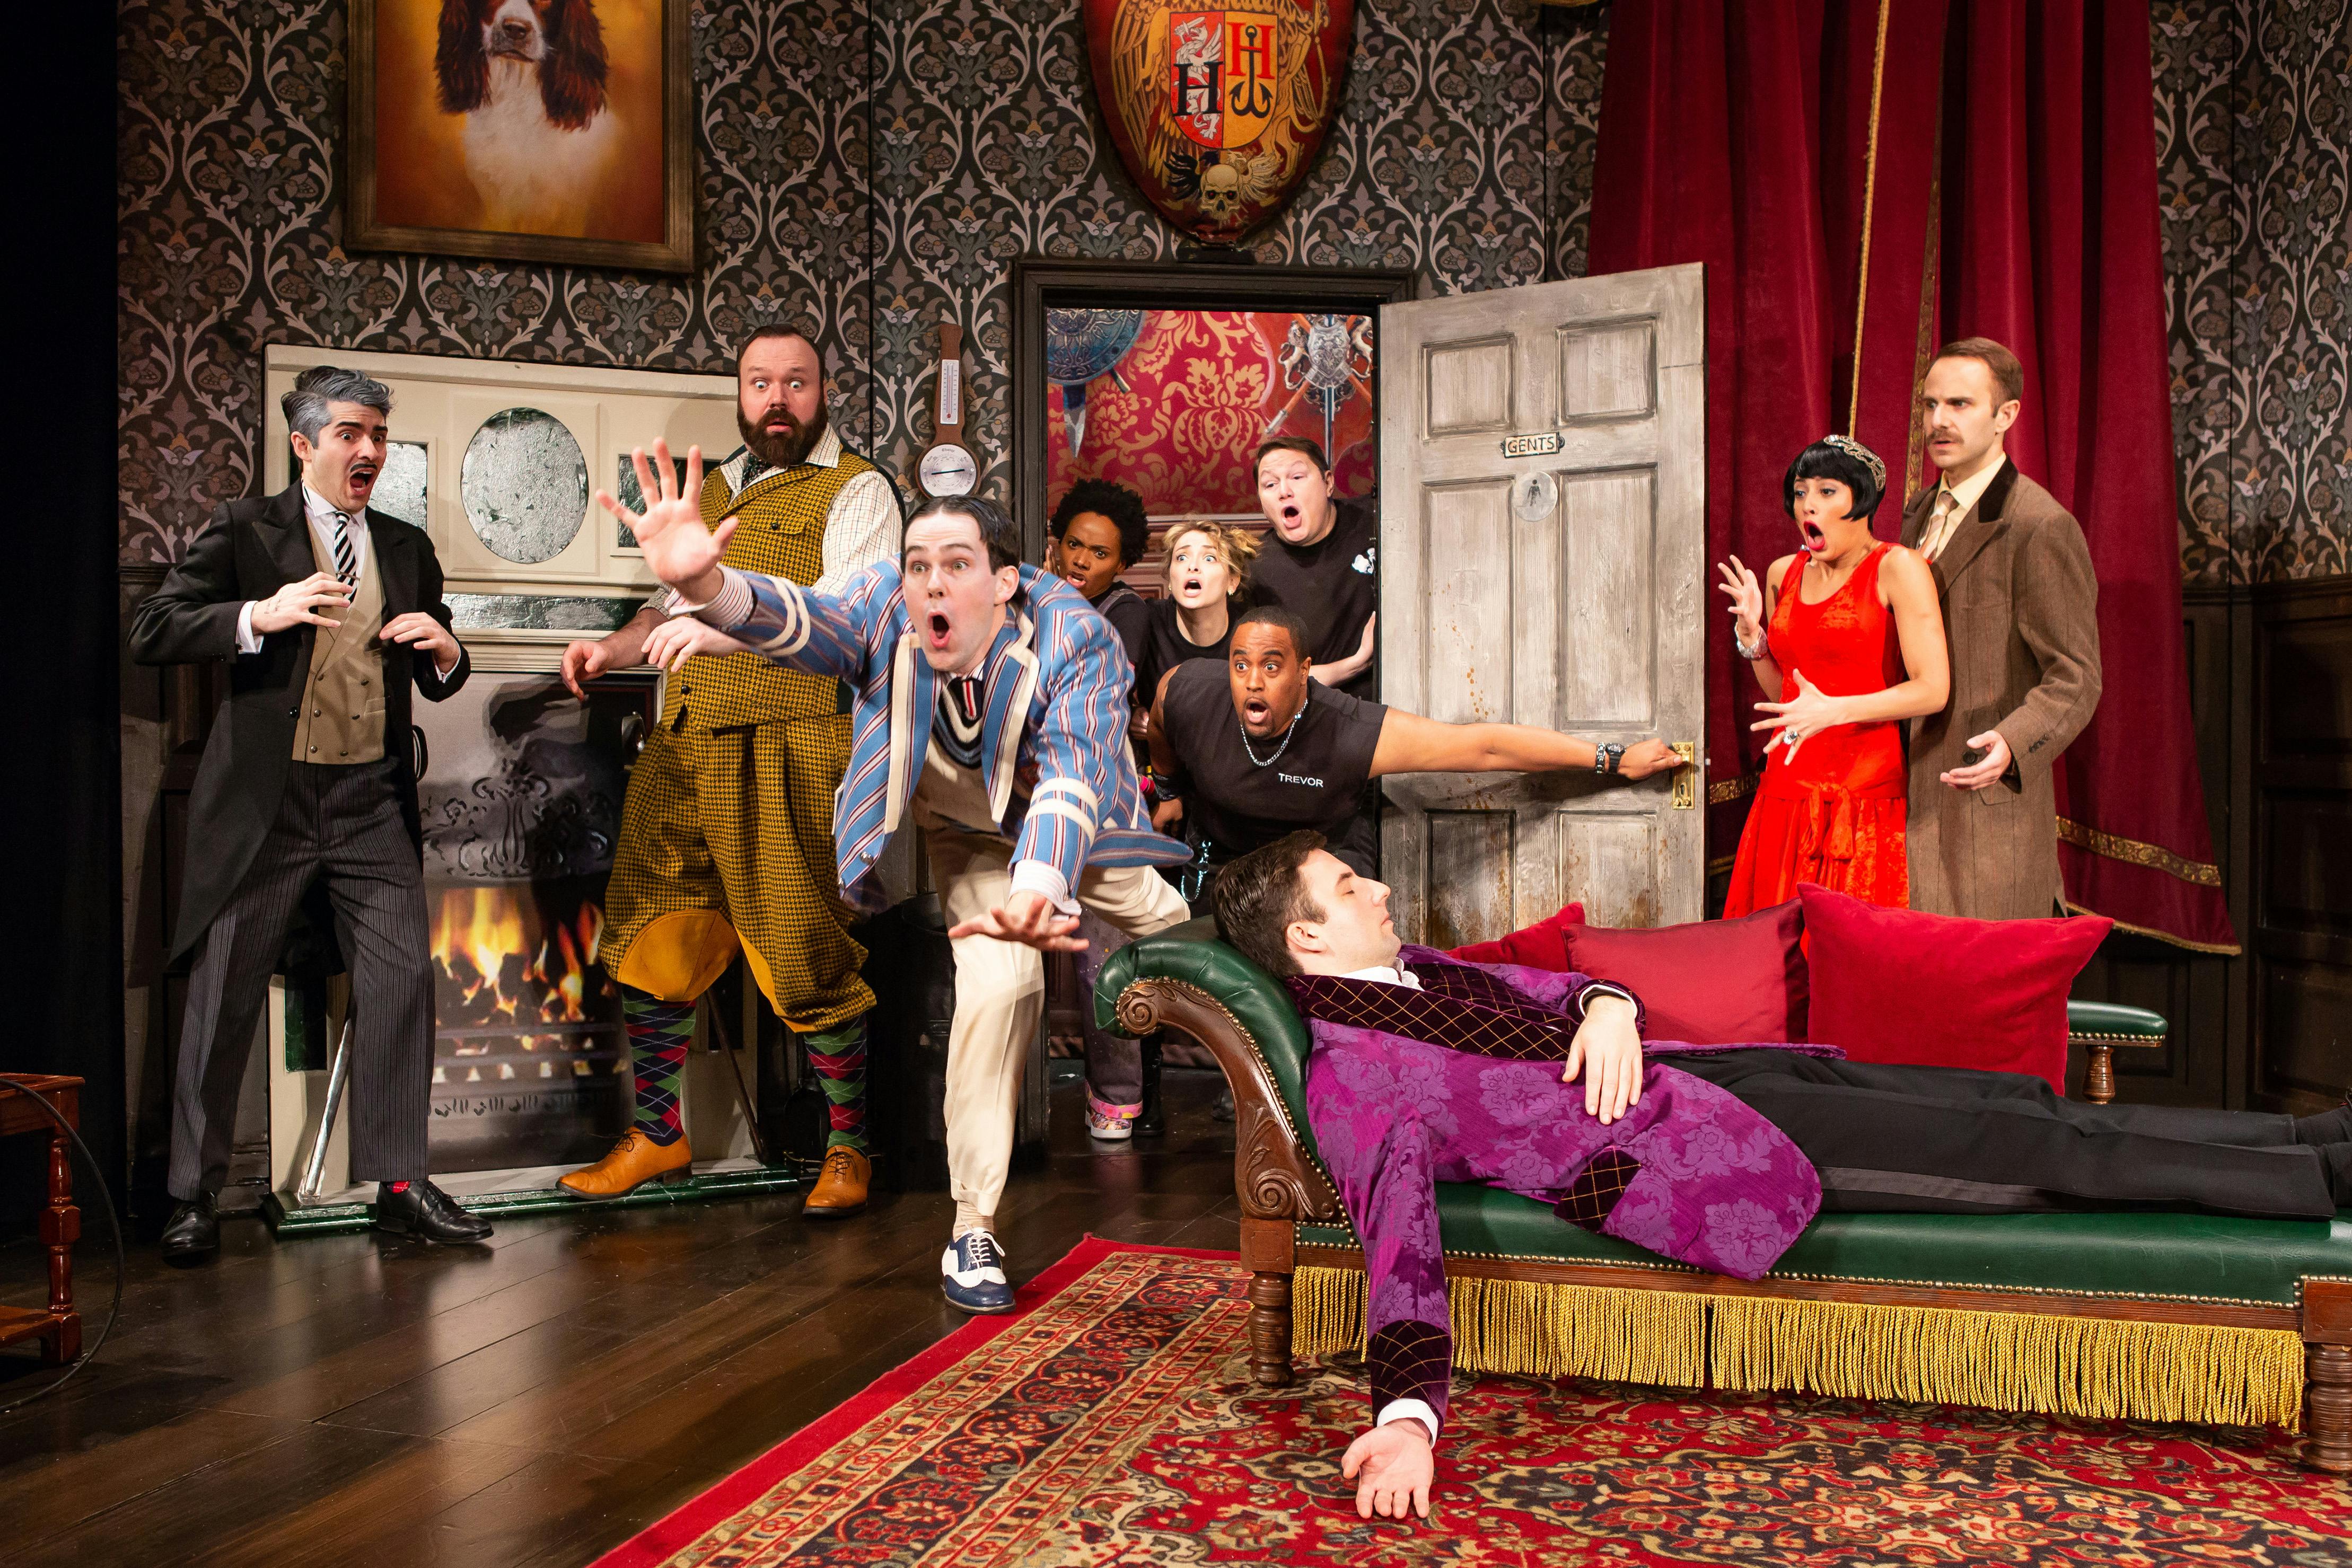 Biglietti Off-Broadway per The Play That Goes Wrong